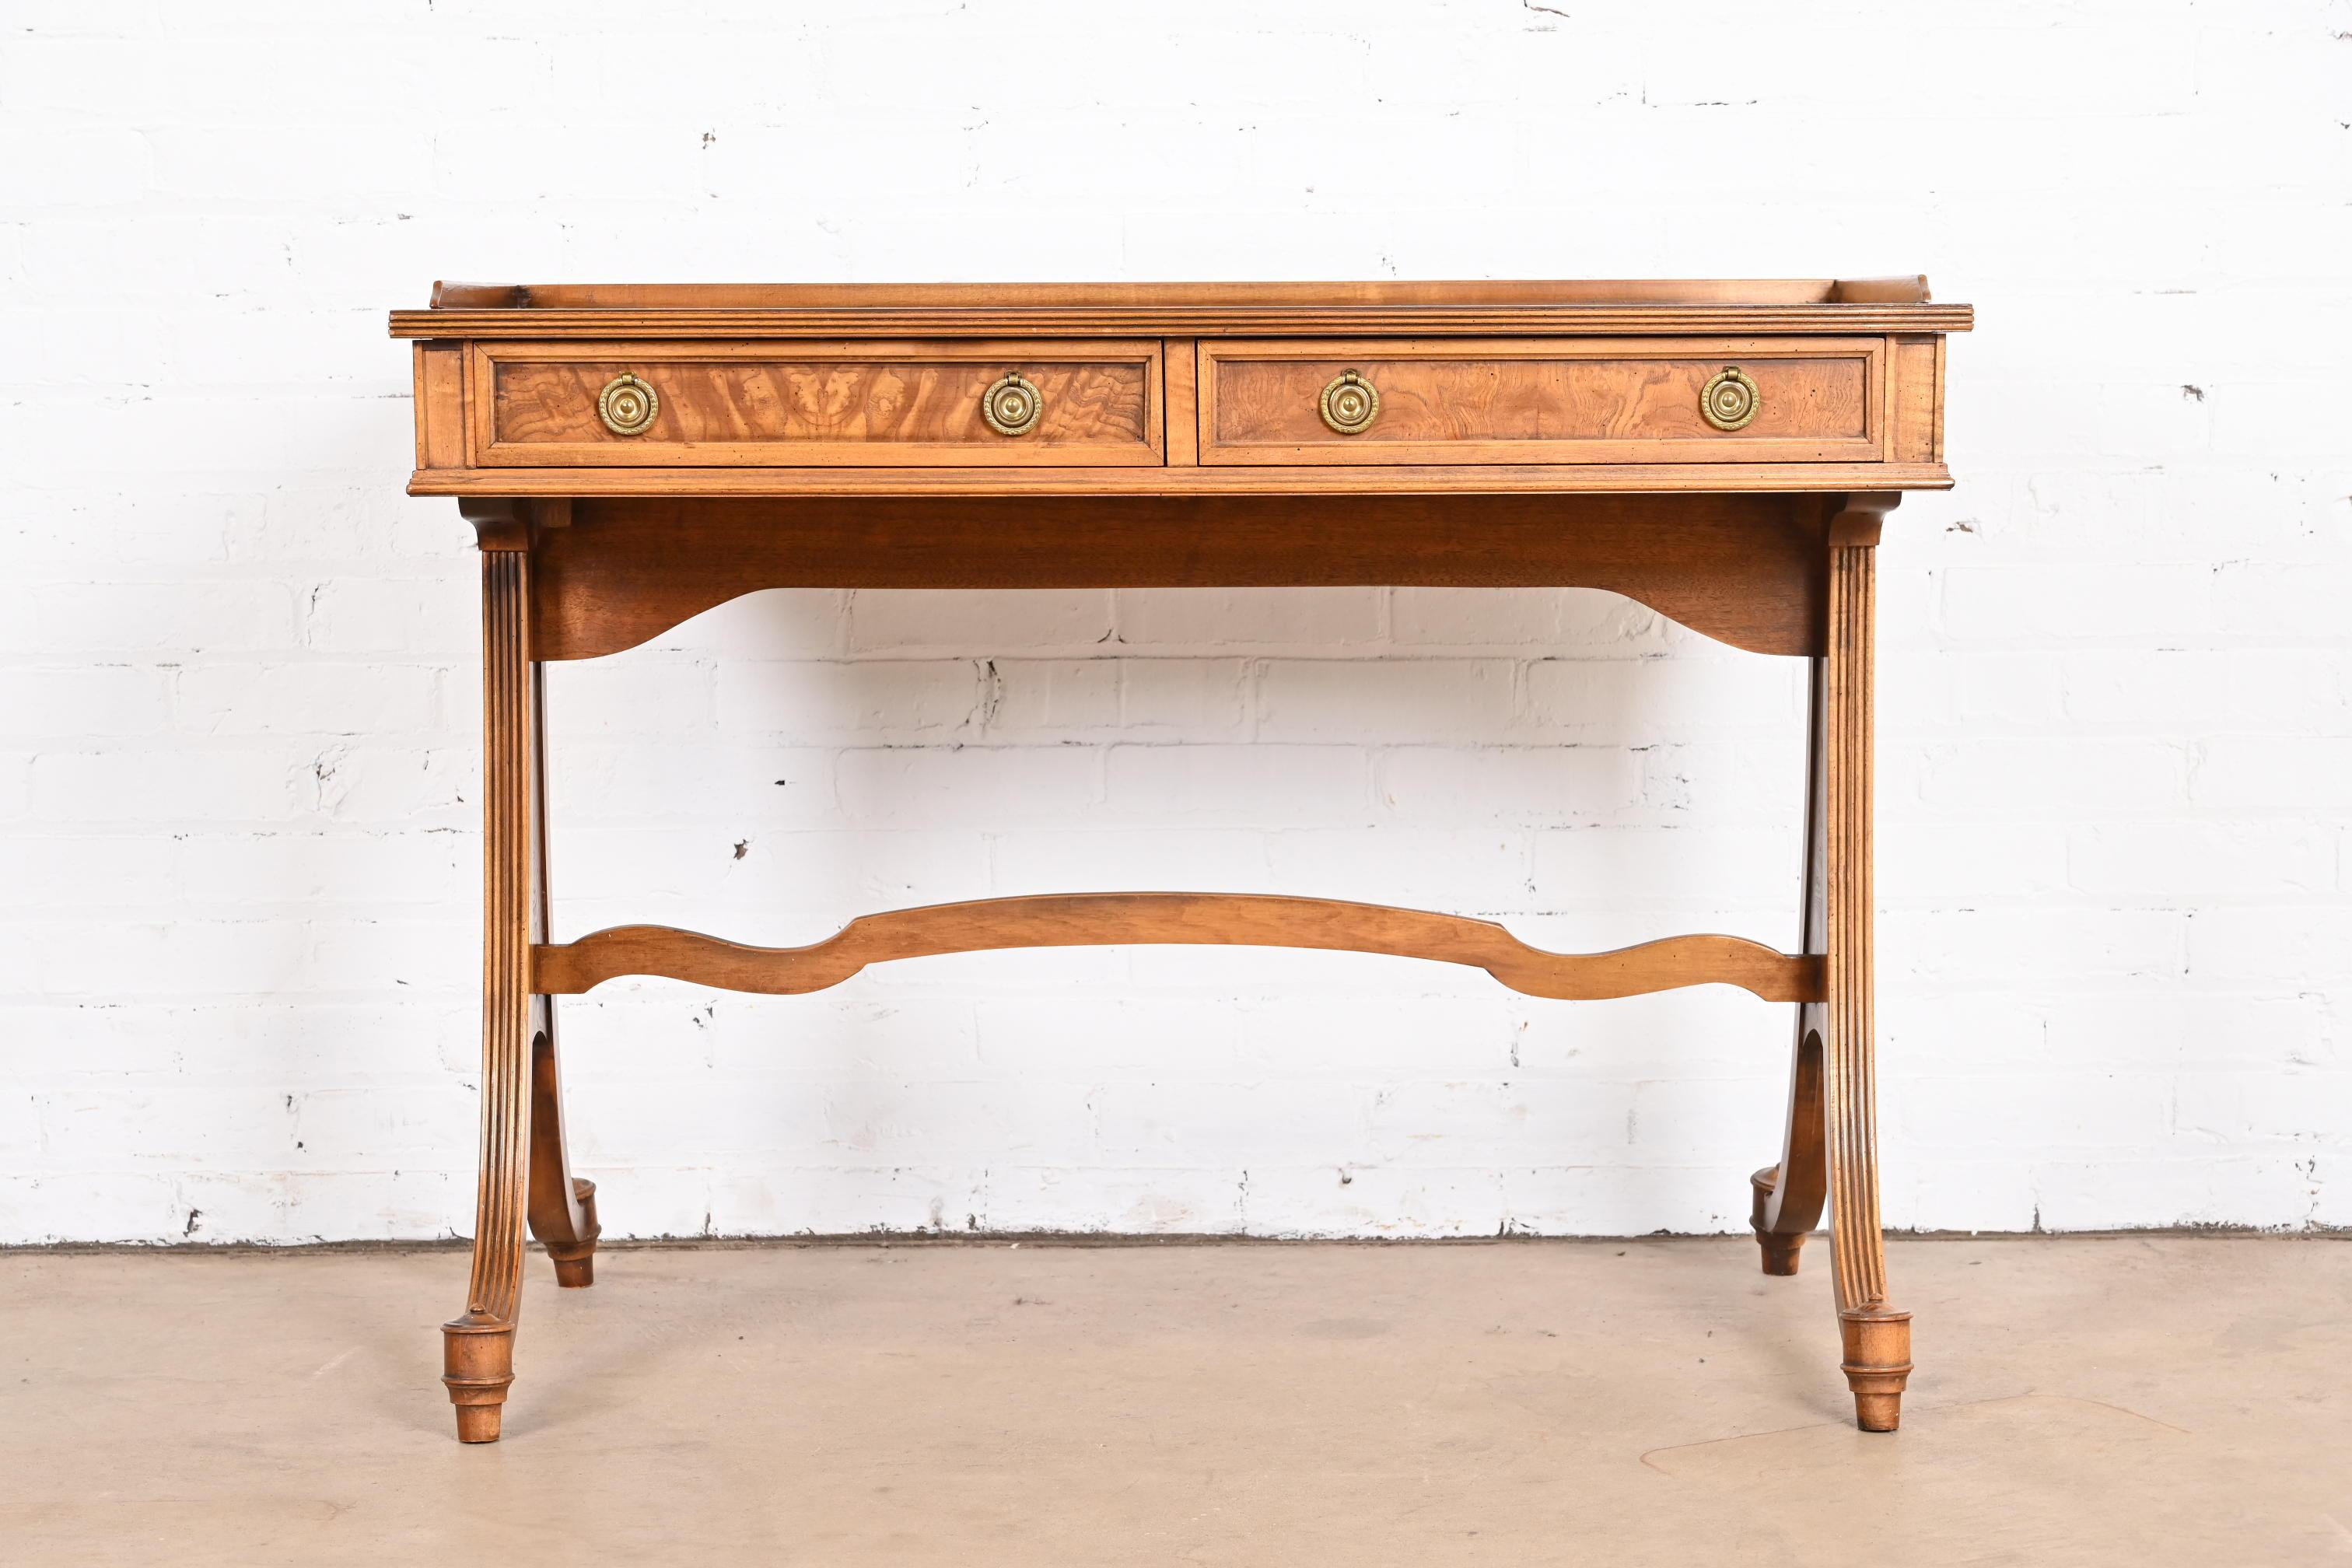 20th Century Baker Furniture English Regency Burled Walnut Writing Desk or Console Table For Sale